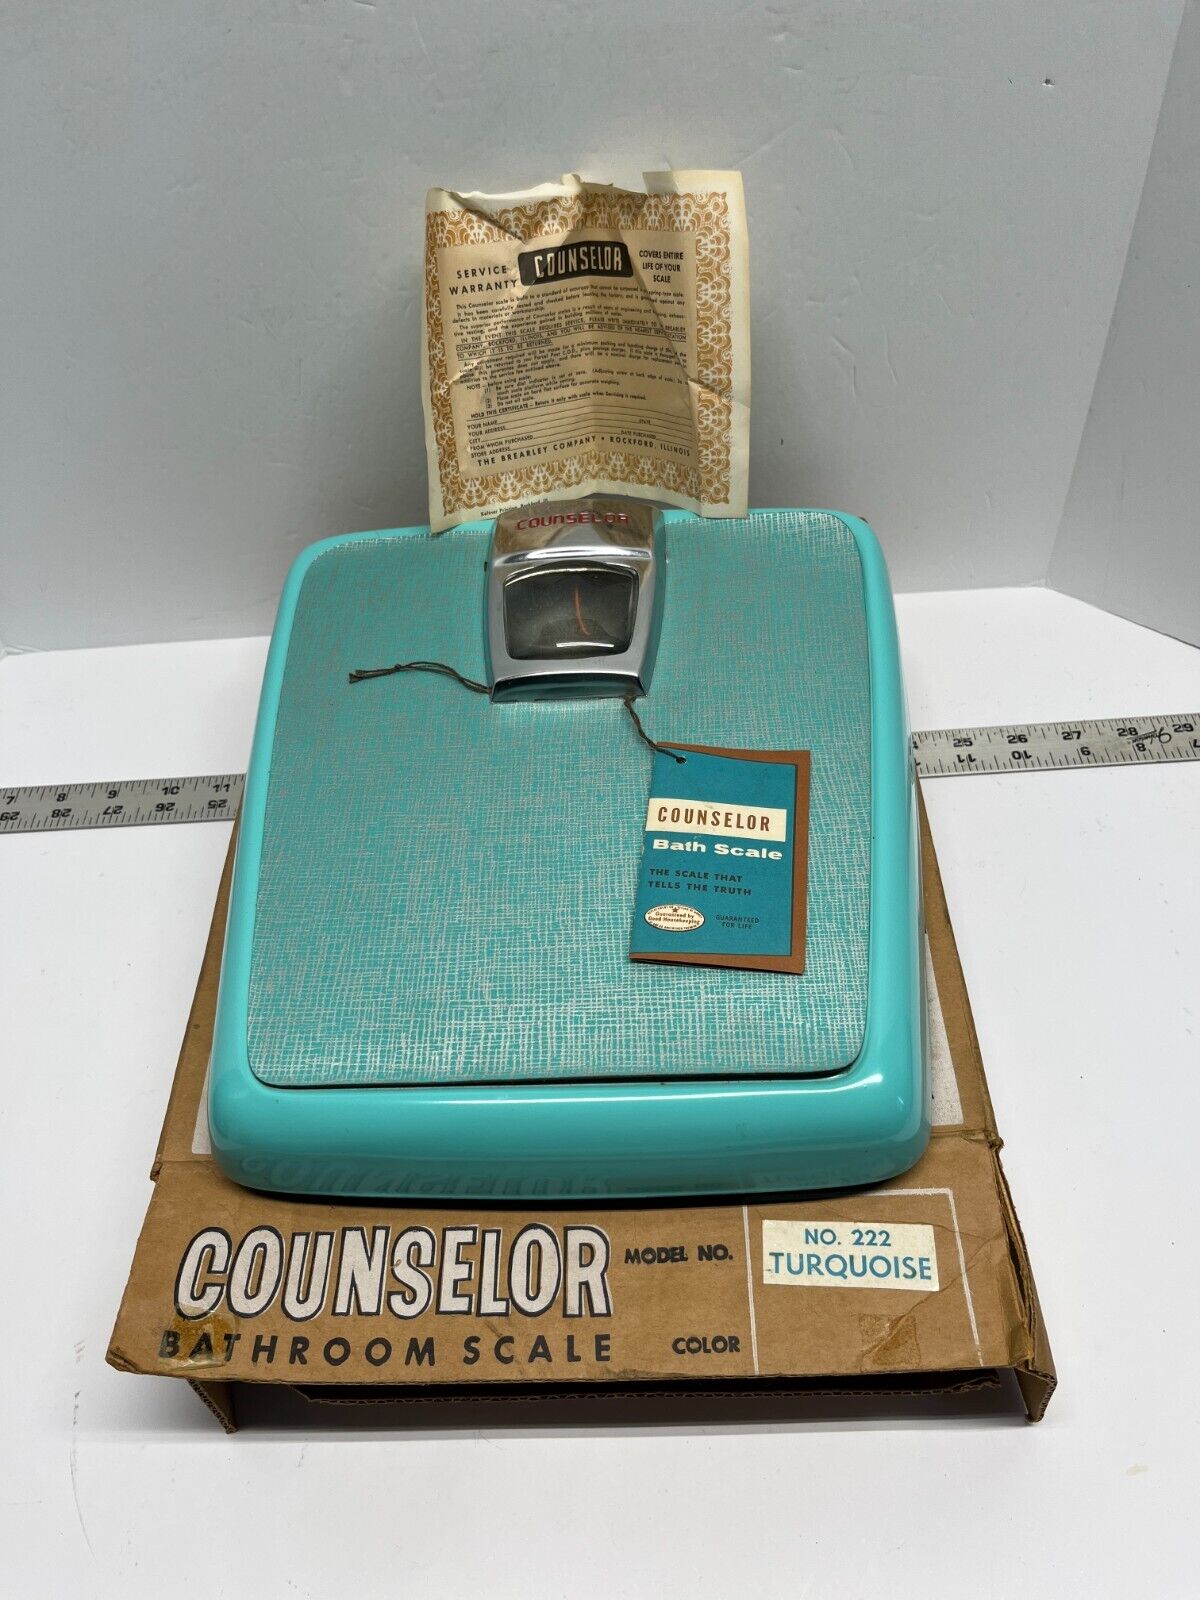 Vintage Brearley Counselor Bathroom Scale Model 222 Turqouise w/Box WORKS